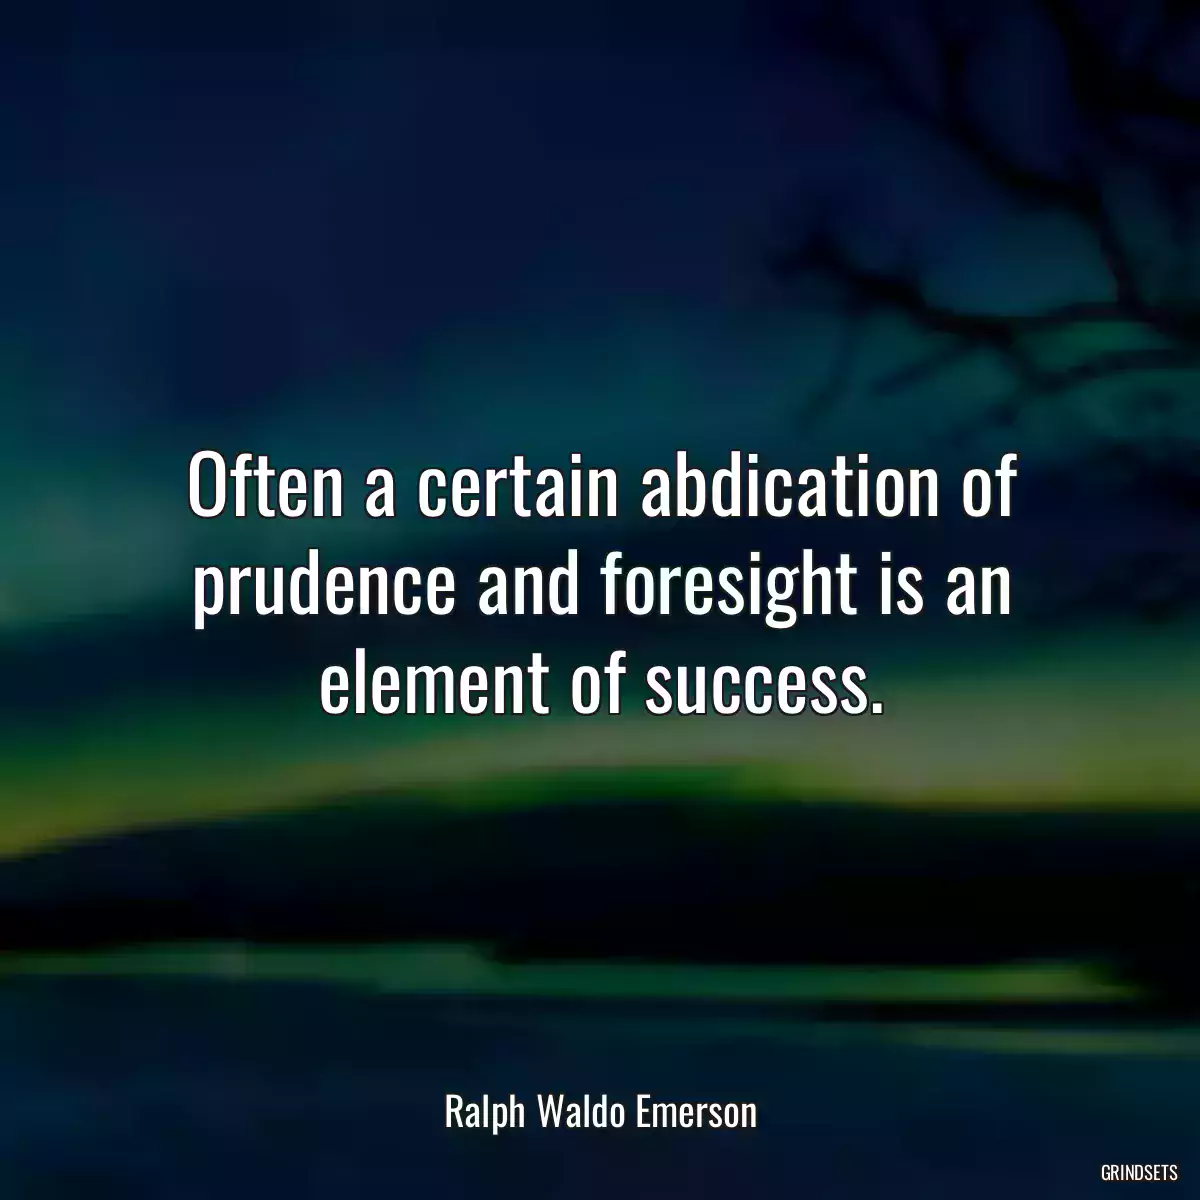 Often a certain abdication of prudence and foresight is an element of success.